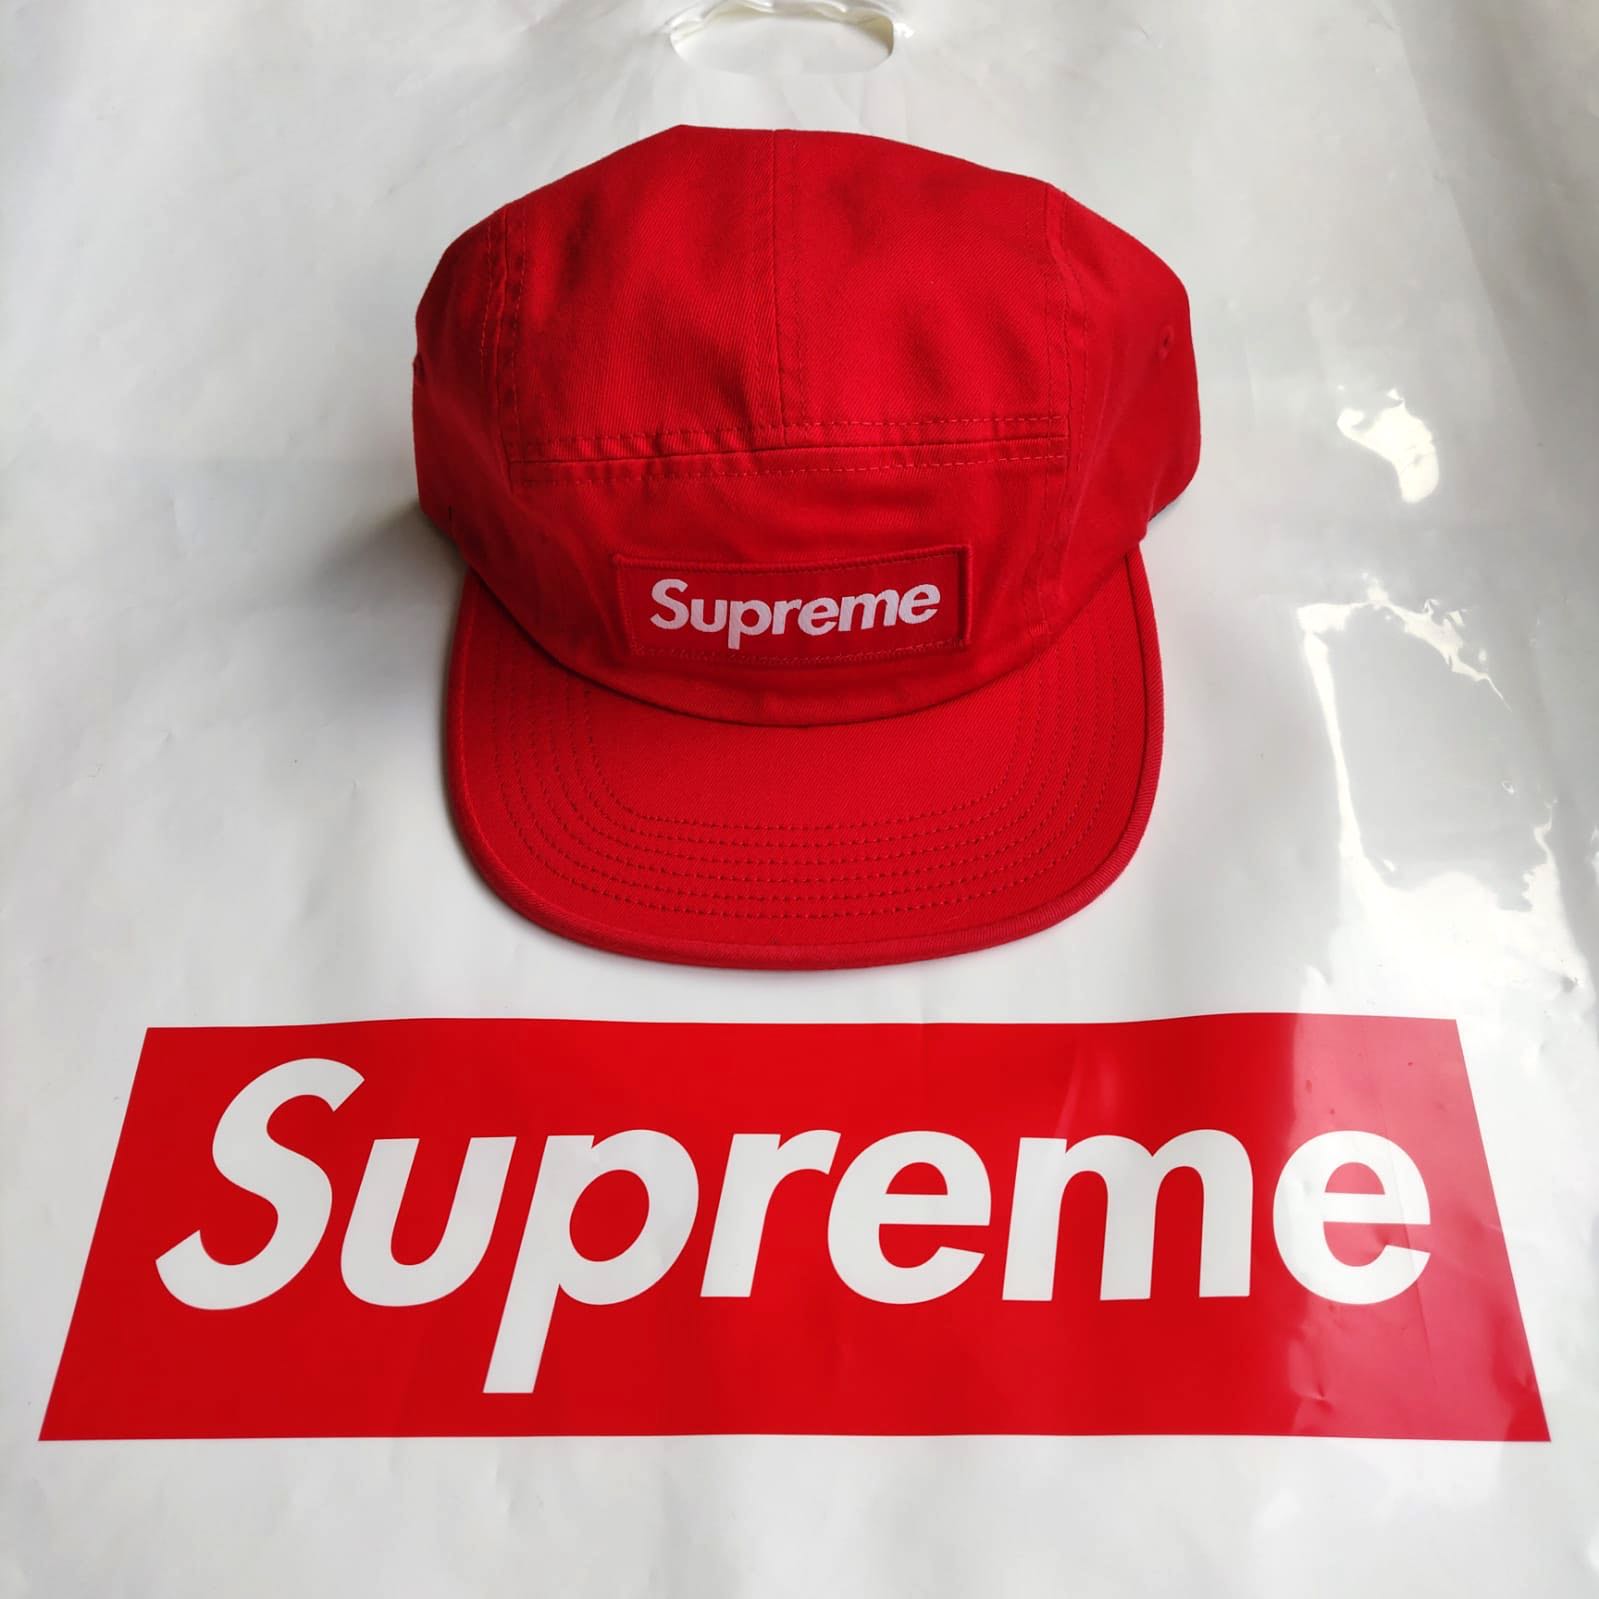 Supreme Washed Chino Twill Camp Cap - Red, Men's Fashion, Watches